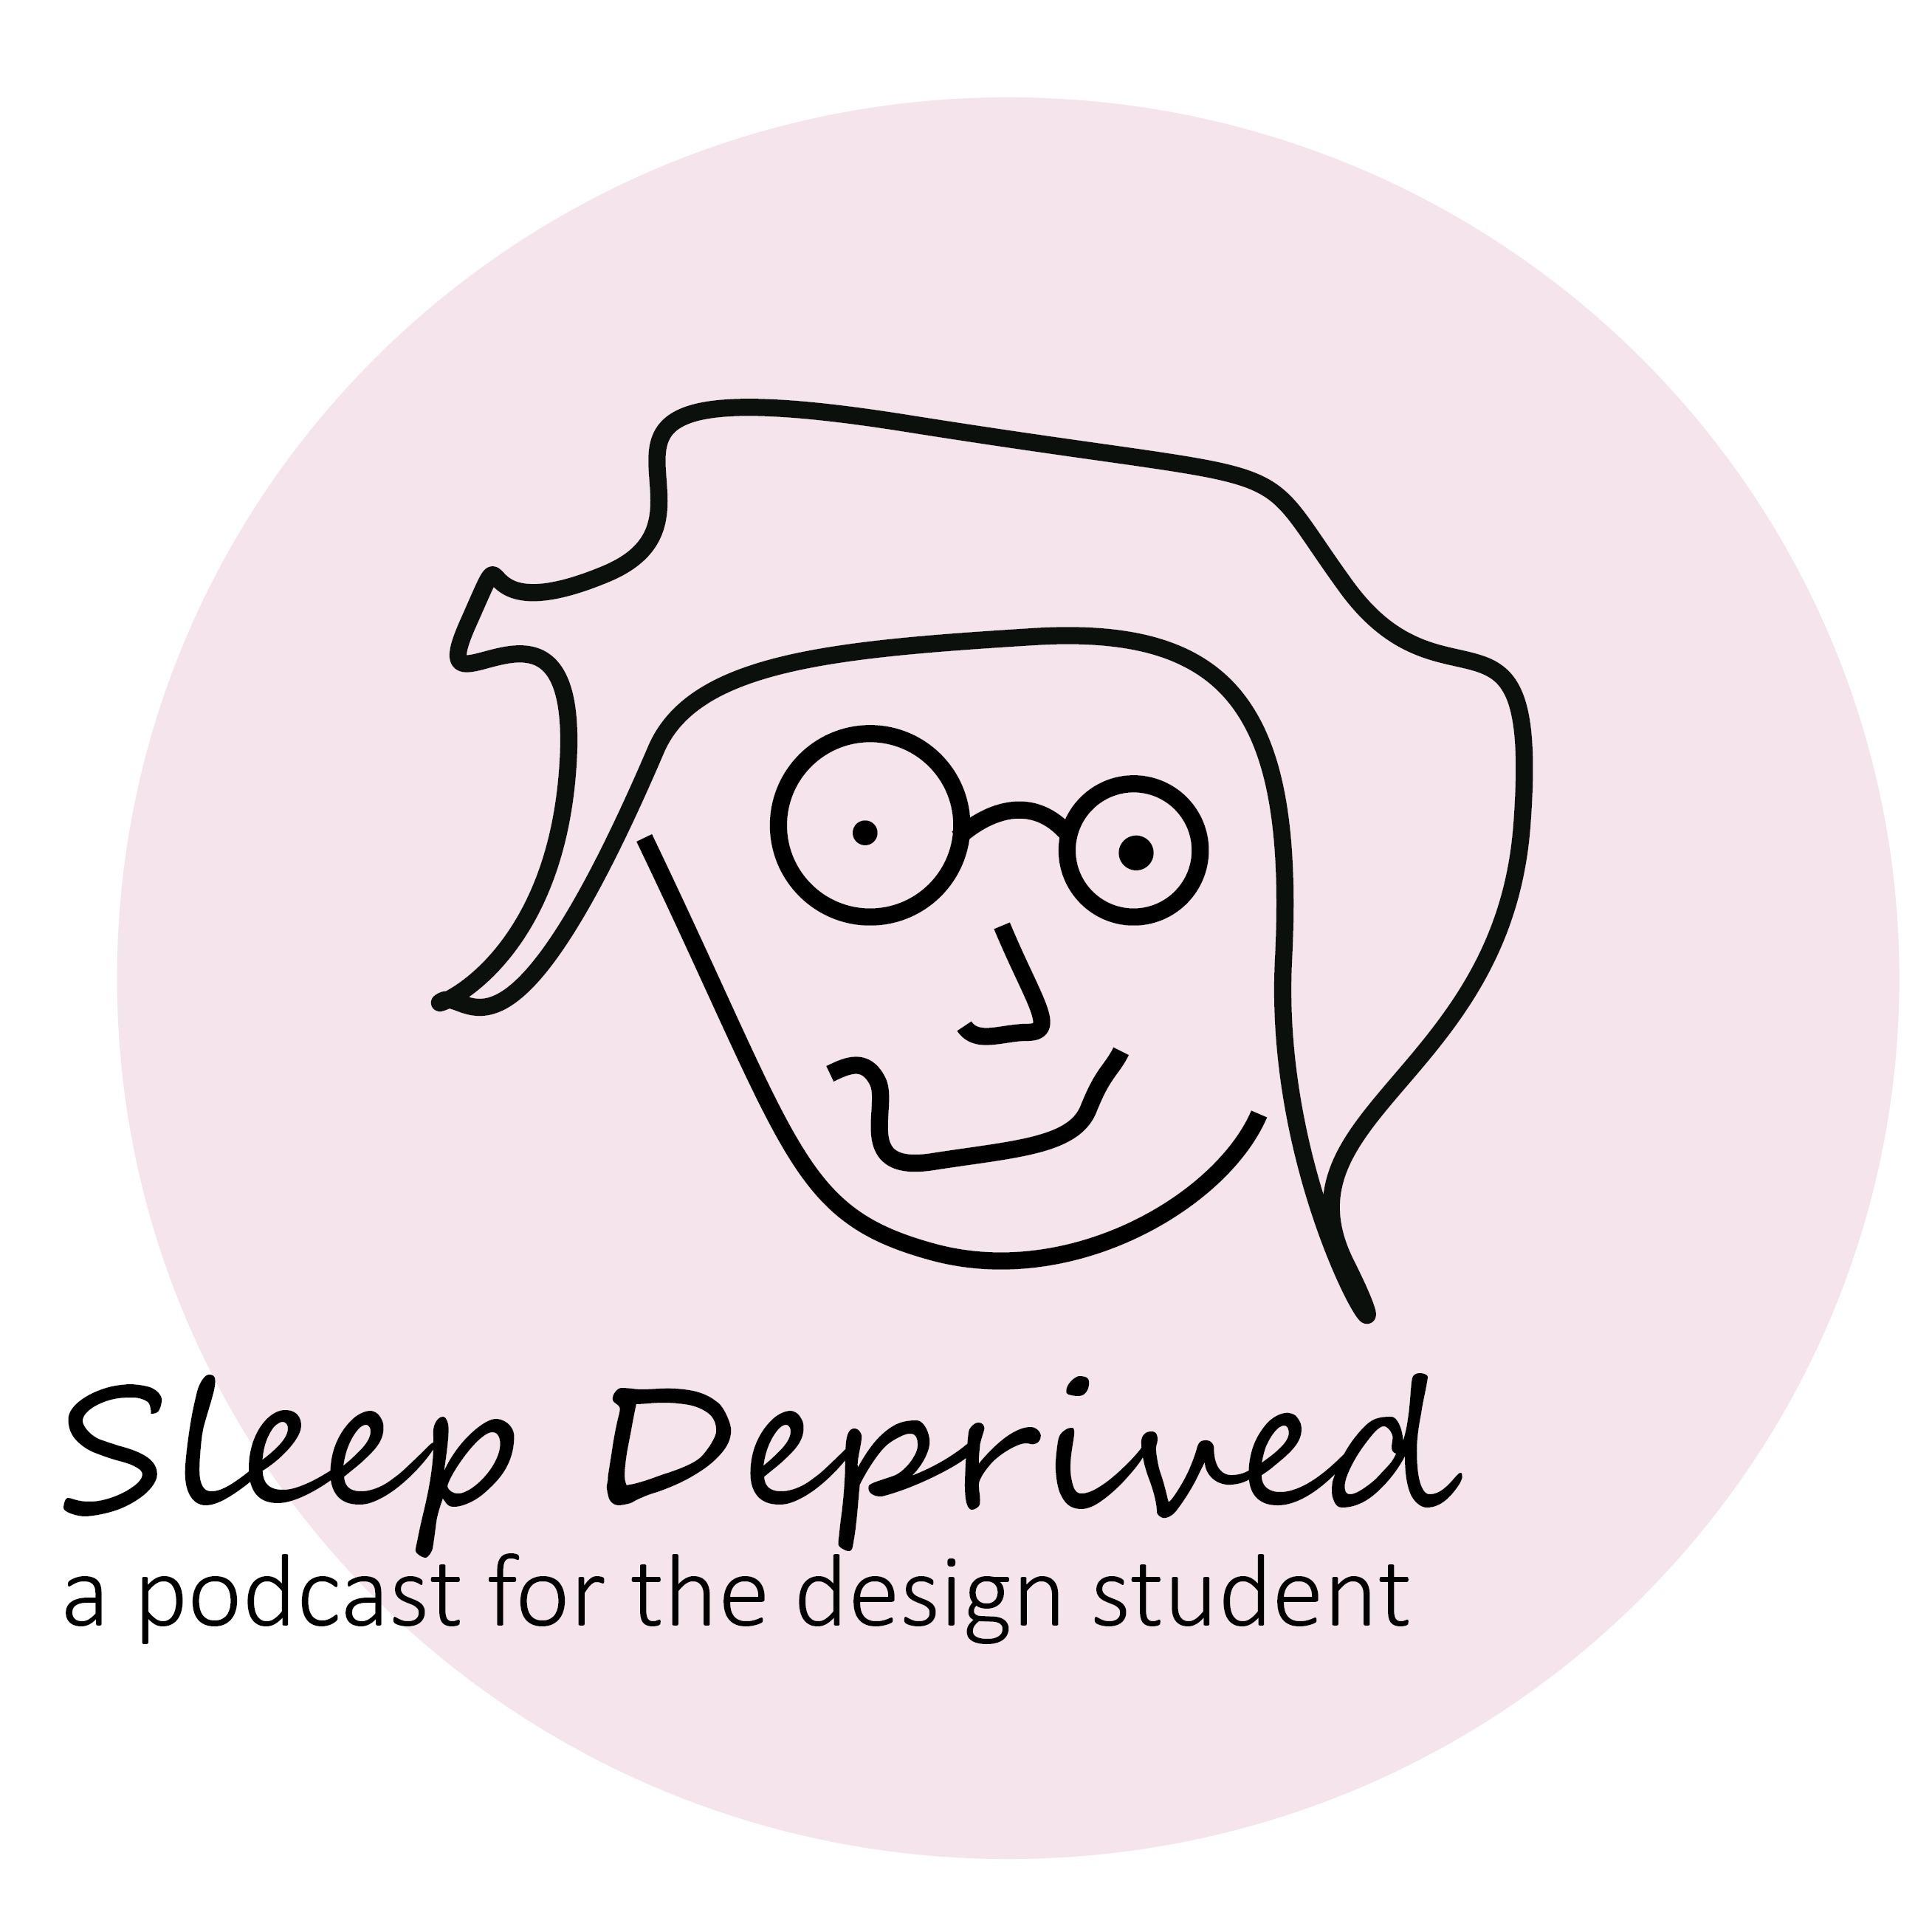 Sleep Deprived: A Podcast for the Design Student